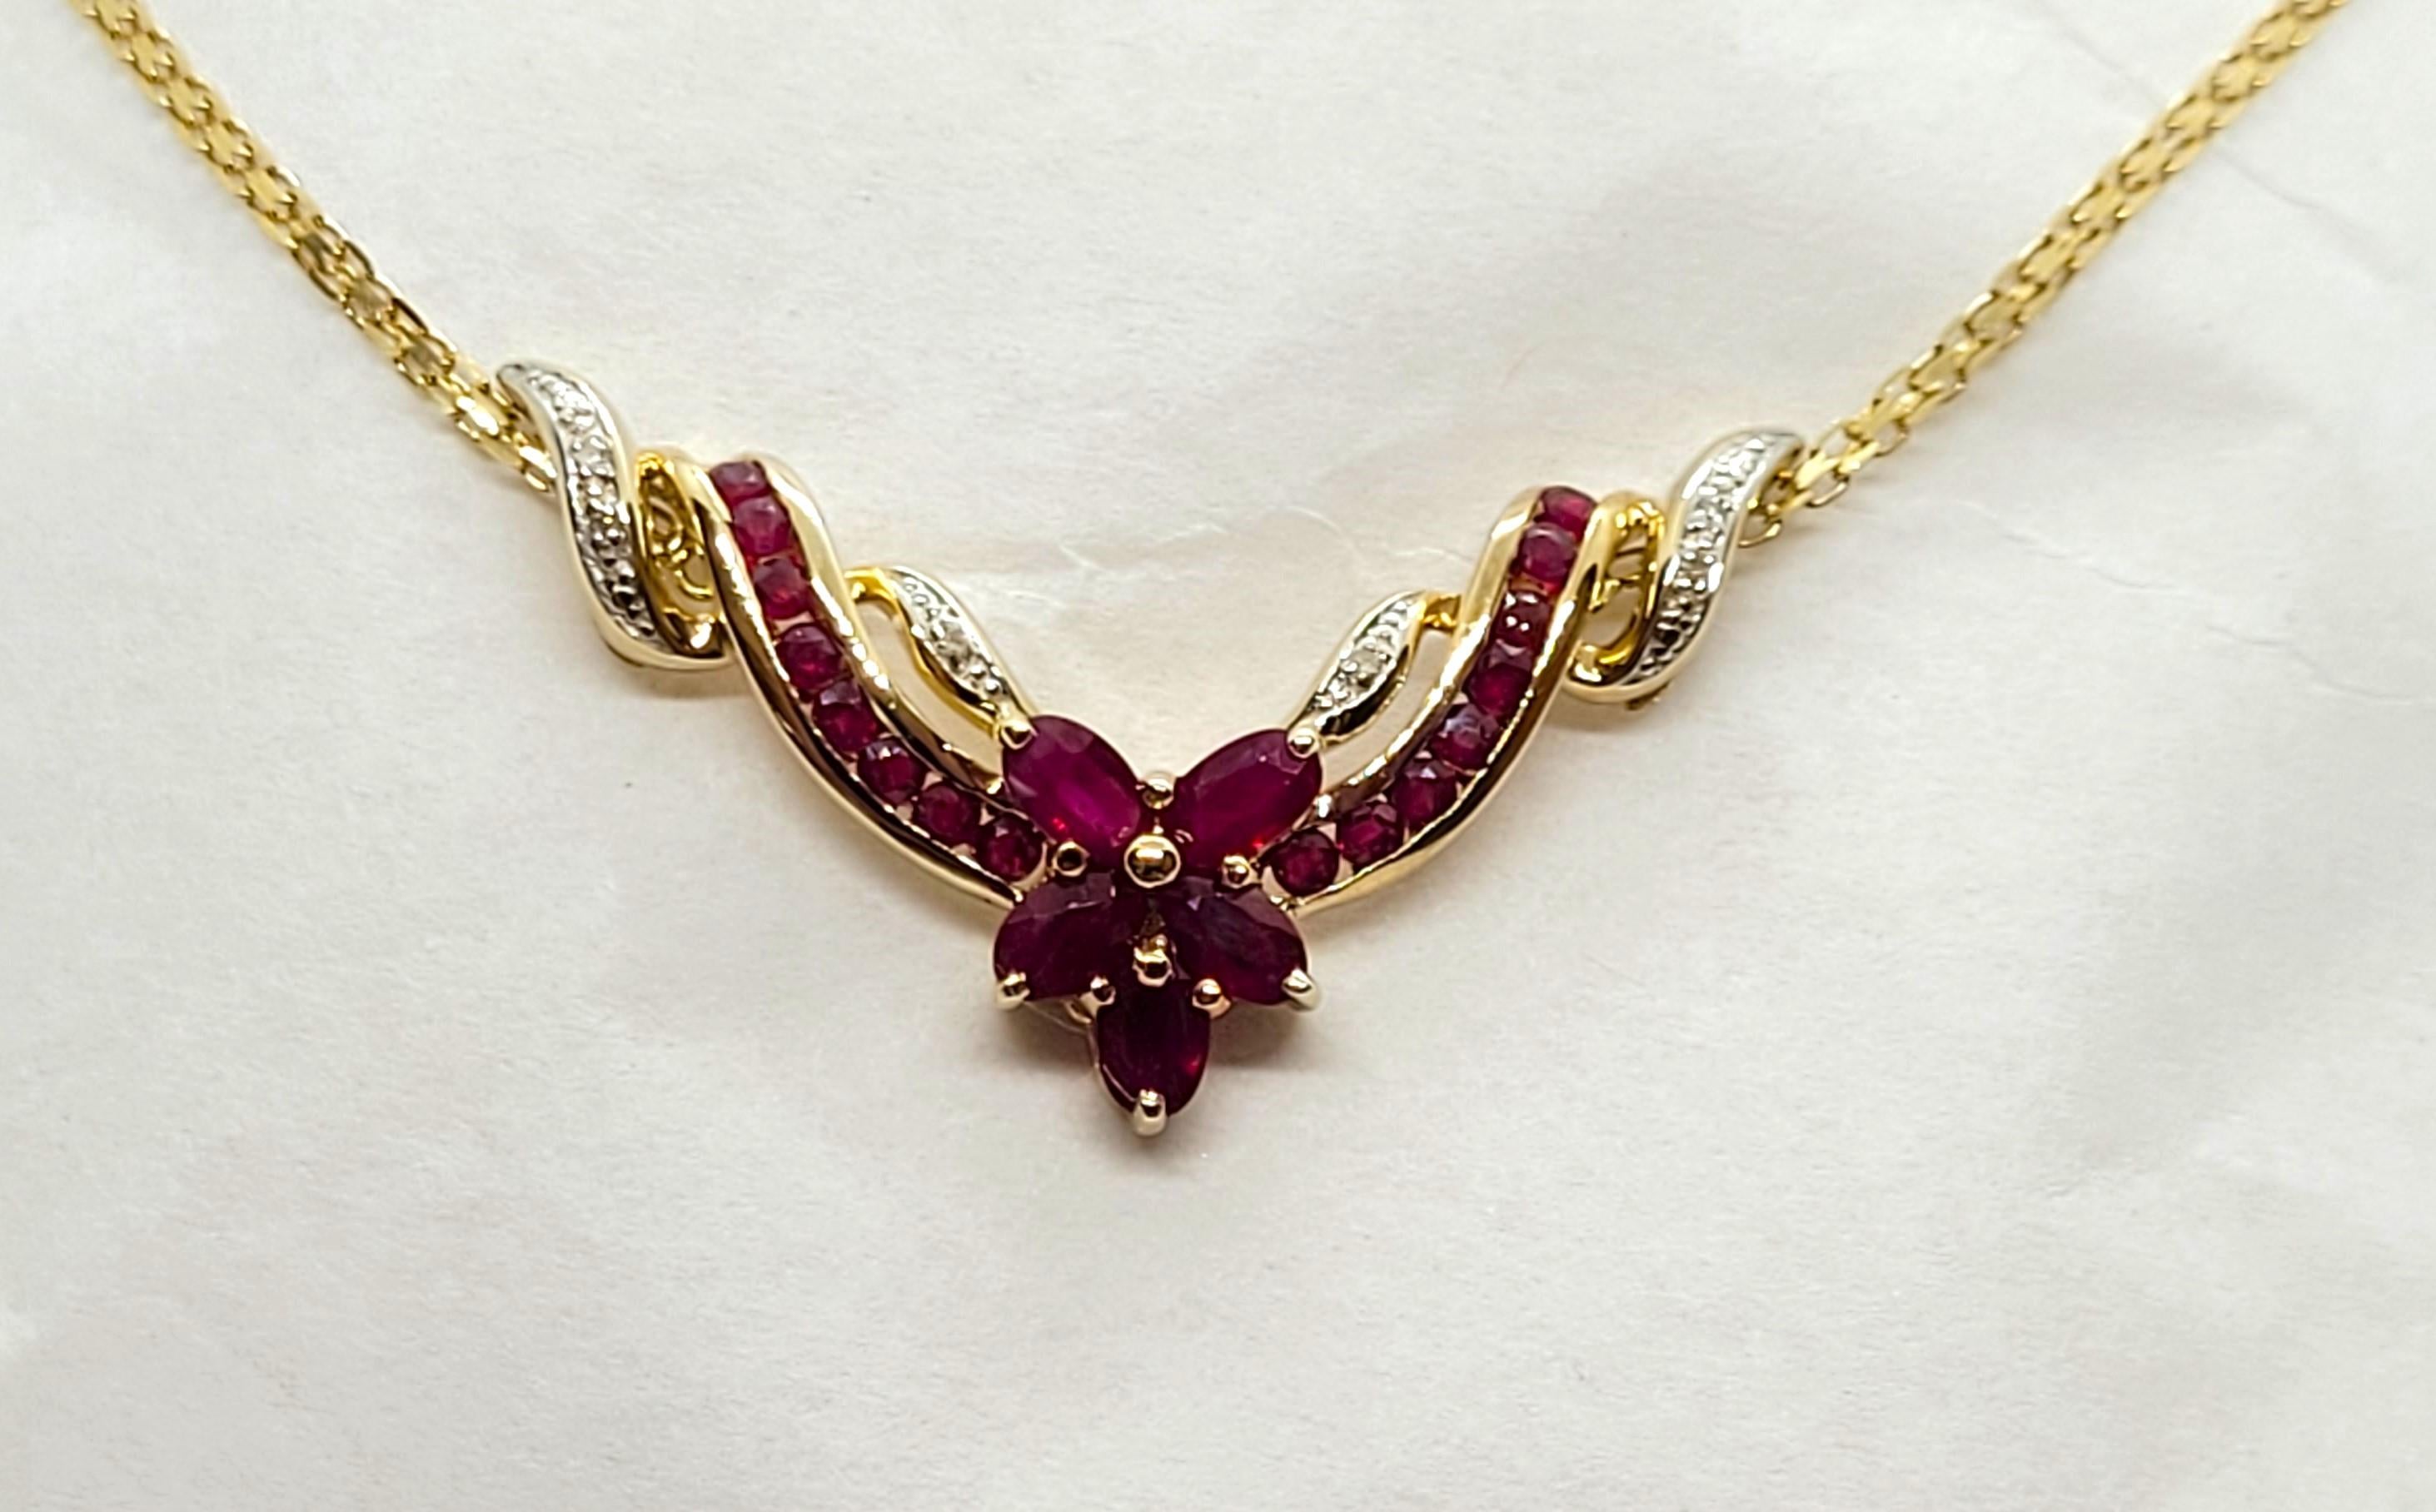 10kt Yellow Gold Ruby Diamond Necklace 17.5 In, 1.75cttw Rubies, .05cttw Diamond. This is a stunning necklace made of 10kt yellow gold, adorned with five oval rubies of approximately 1.25cttw, sixteen round rubies of approximately .50cttw, and 6